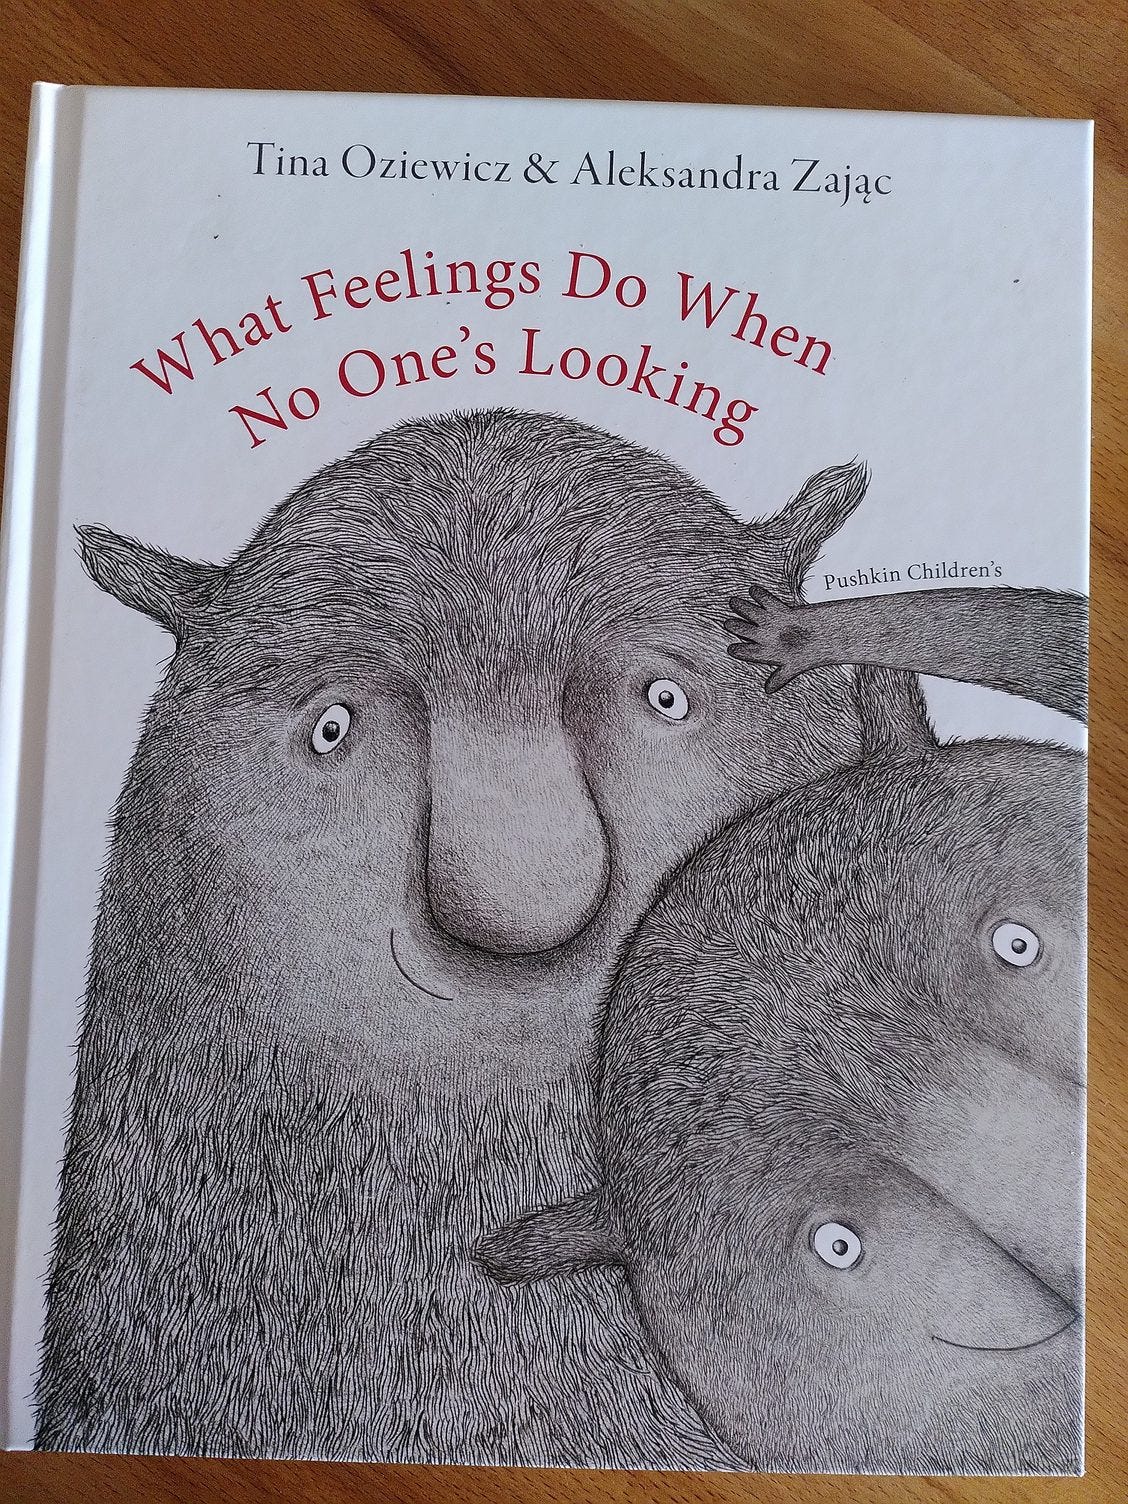 Hardback children's book cover, white background with drawings of 2 furry, friendly looking creatures that take up most of the space. Authors and Title are at top of cover.